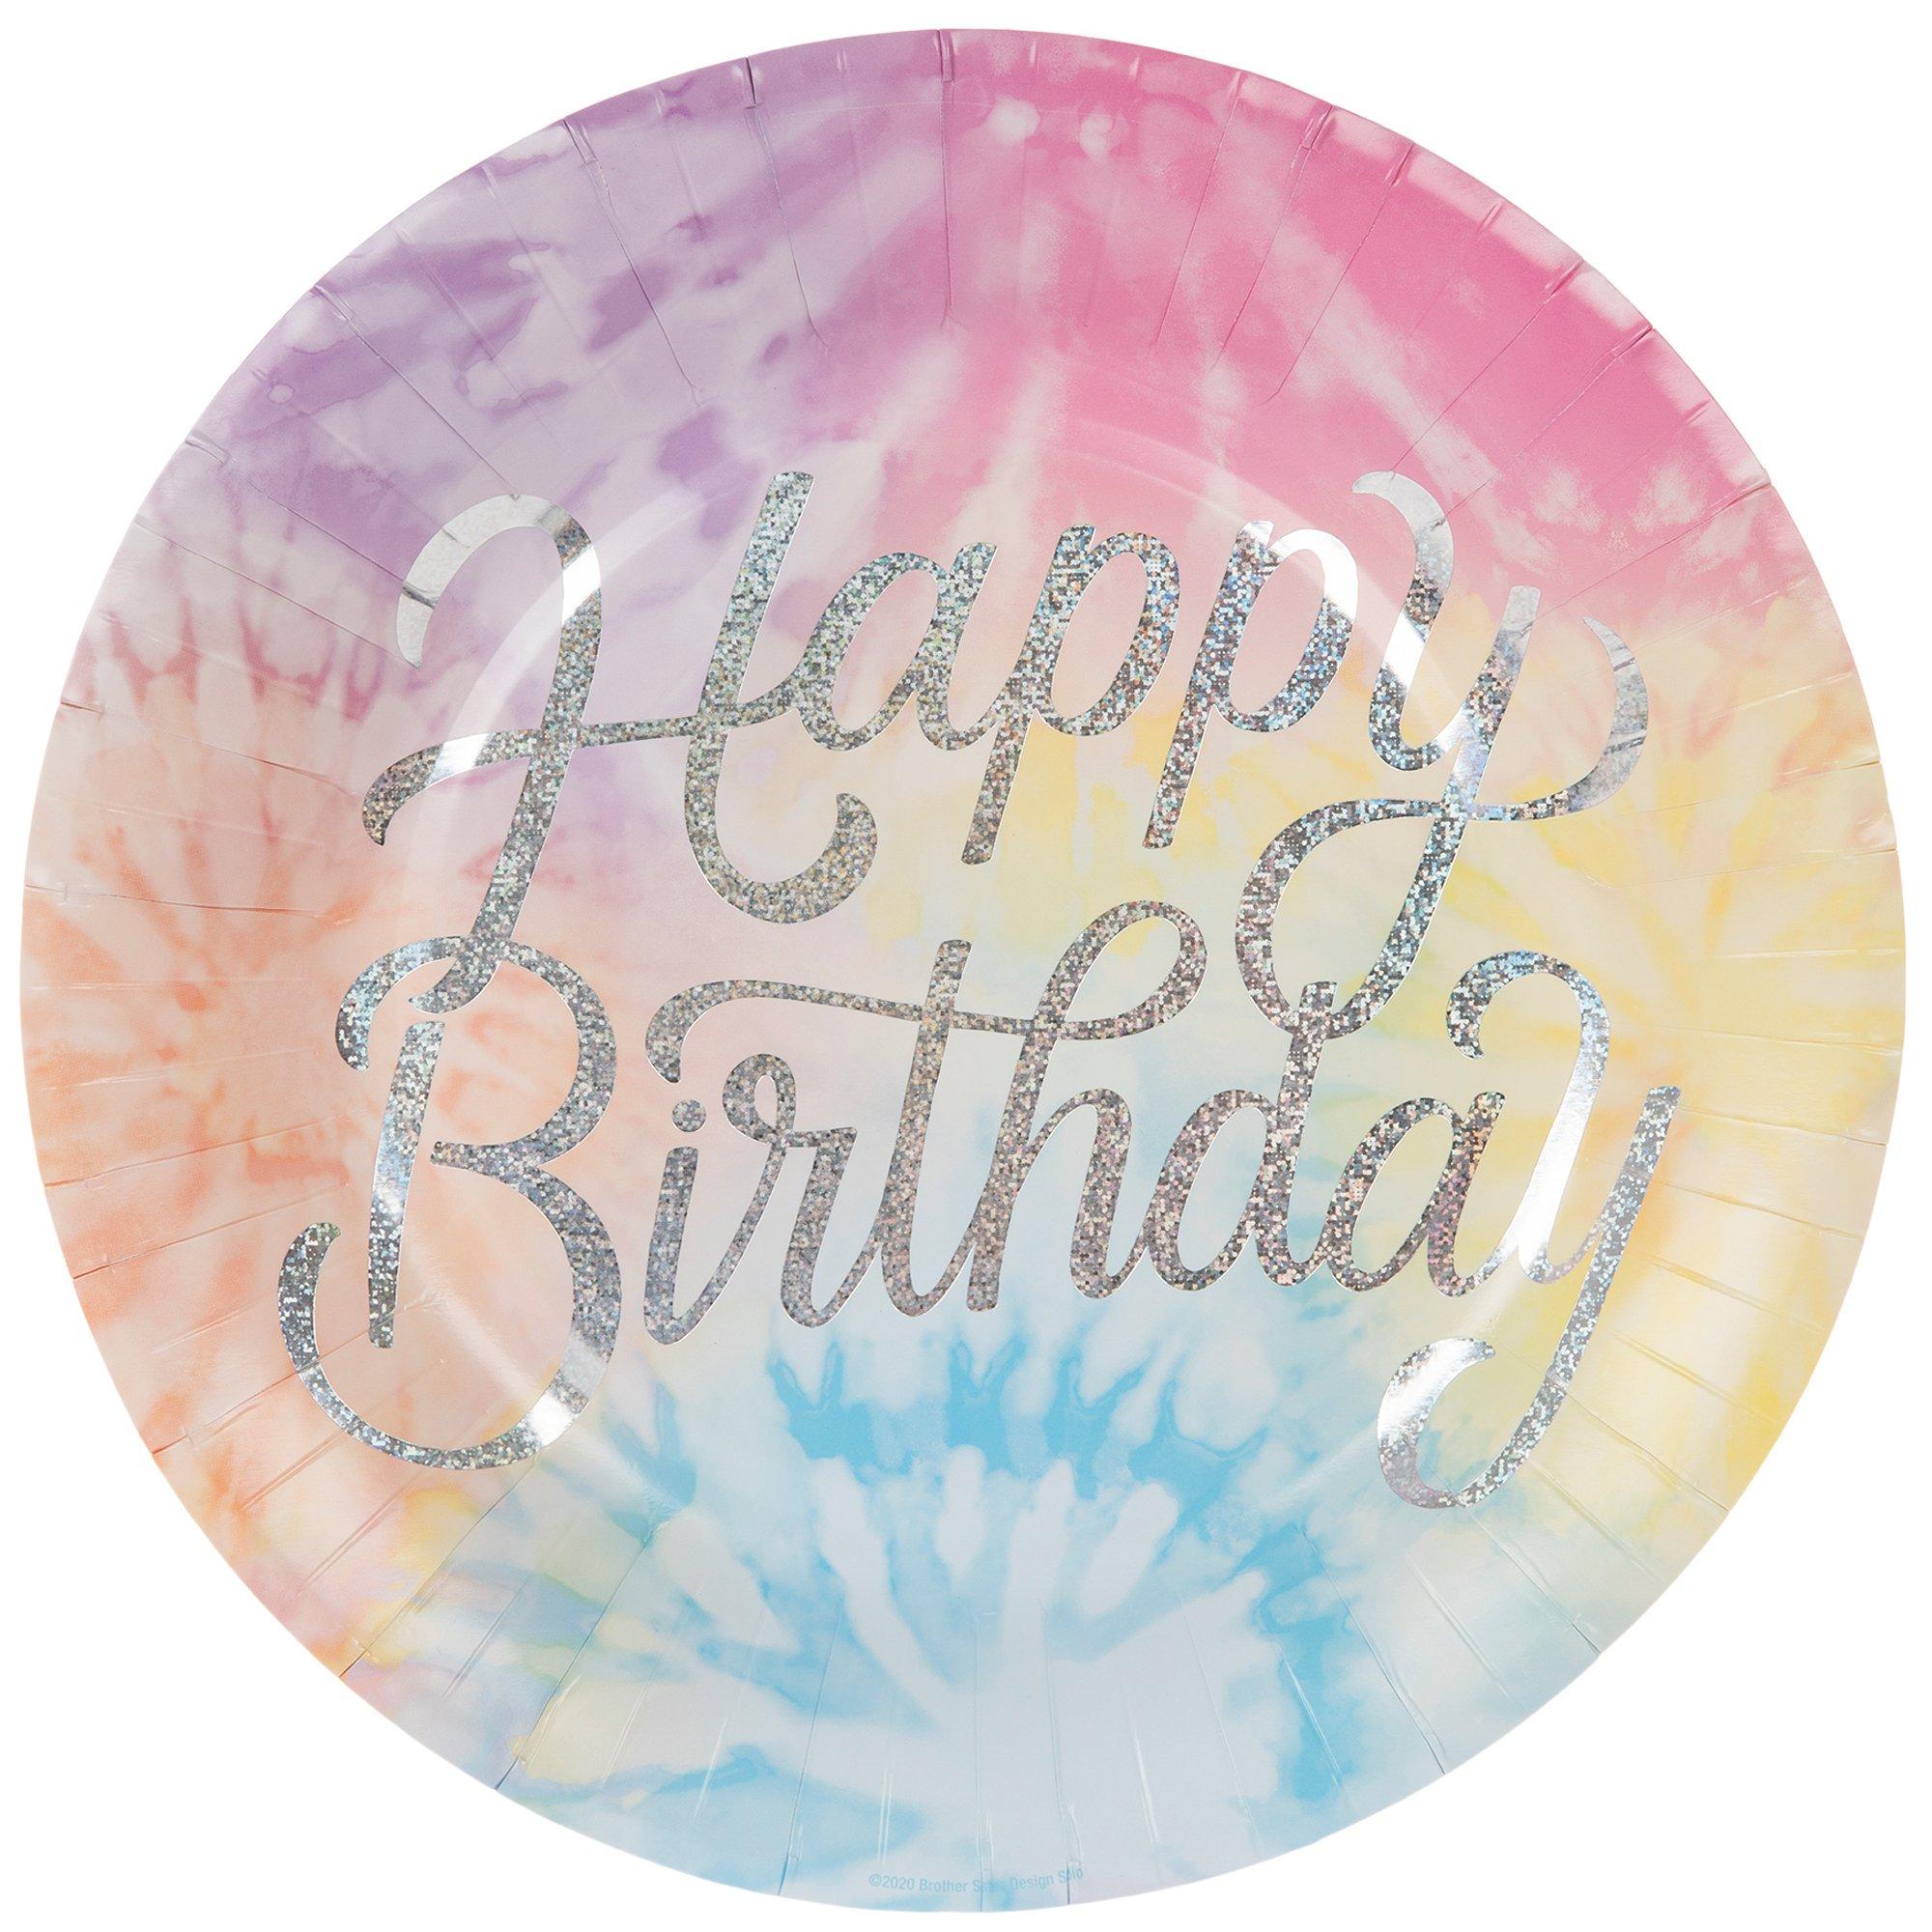 Tie Dye Party Decorations & Birthday Supplies 16 Guests Set Includes  Banner, Balloons, Jumbo Tablecloth, Plates and Disposable Tableware 